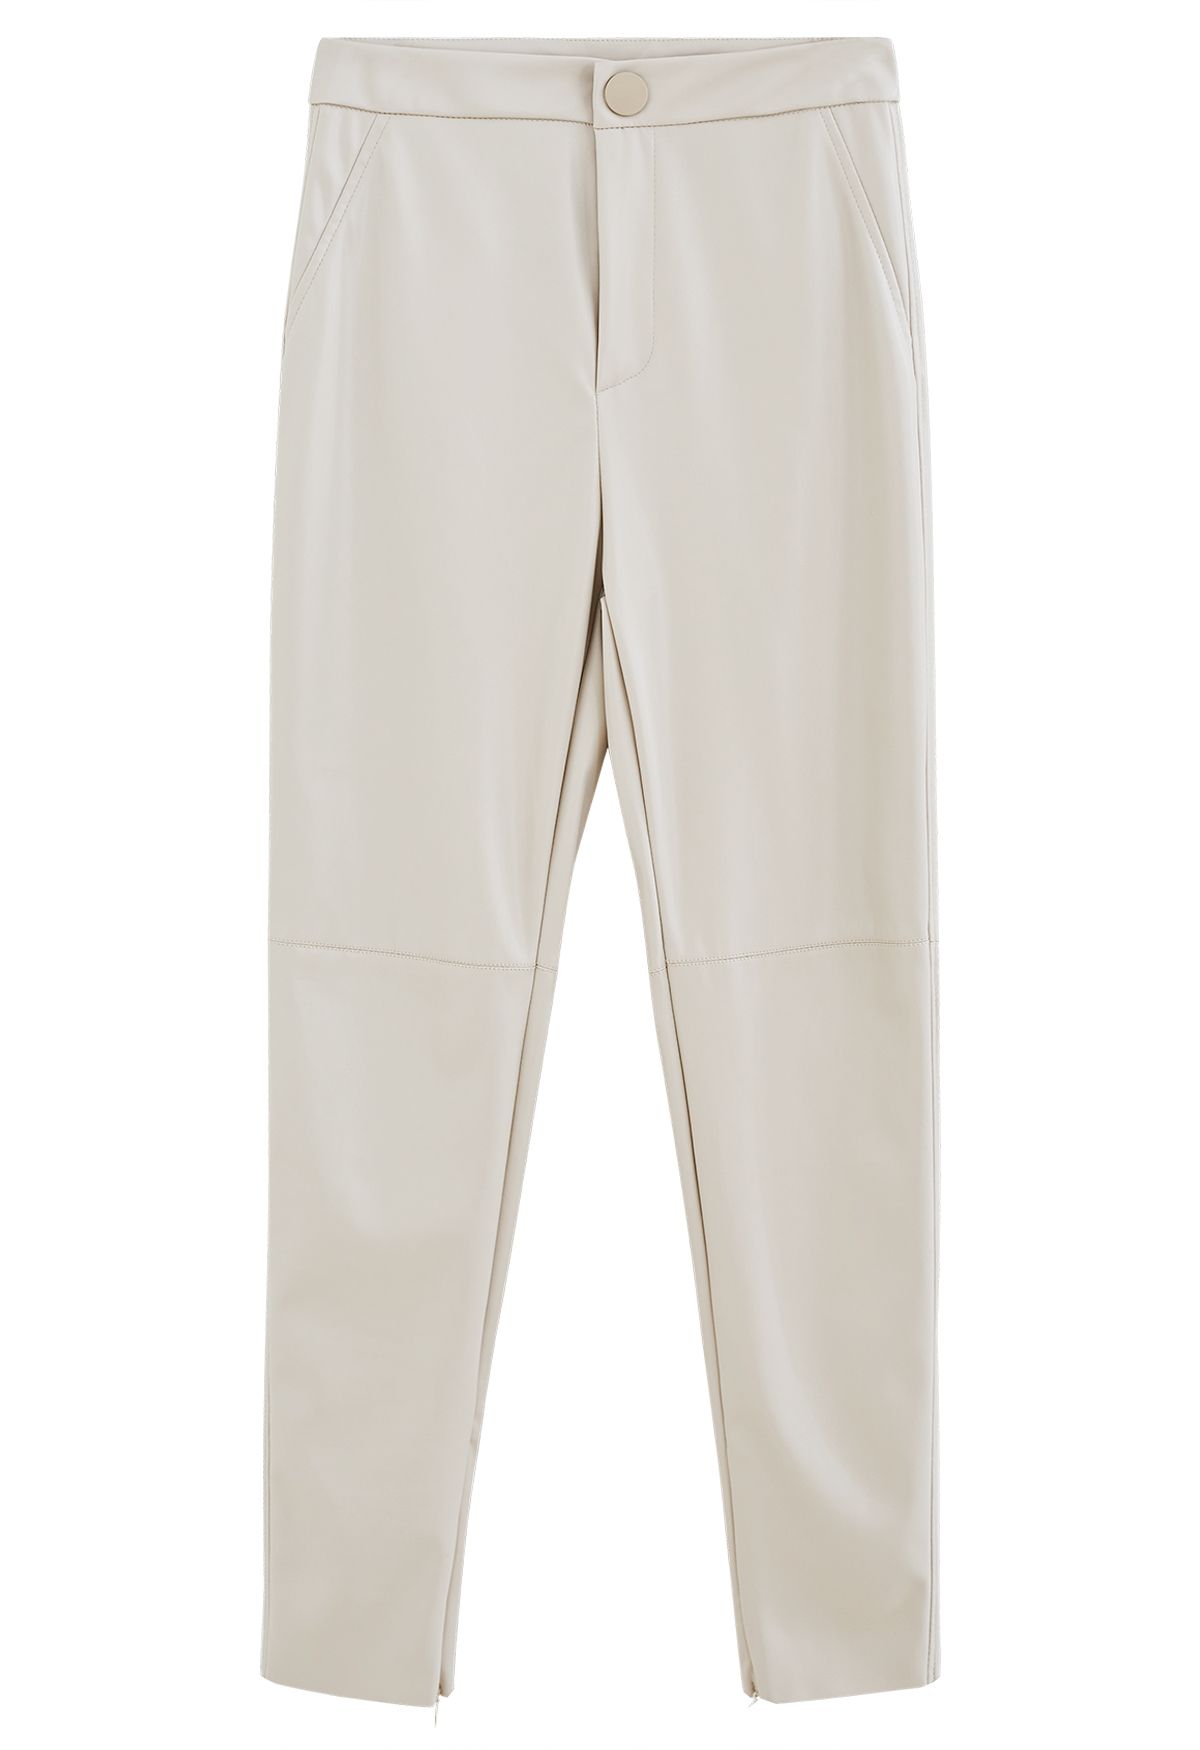 Faux Leather Crop Skinny Pants in Ivory